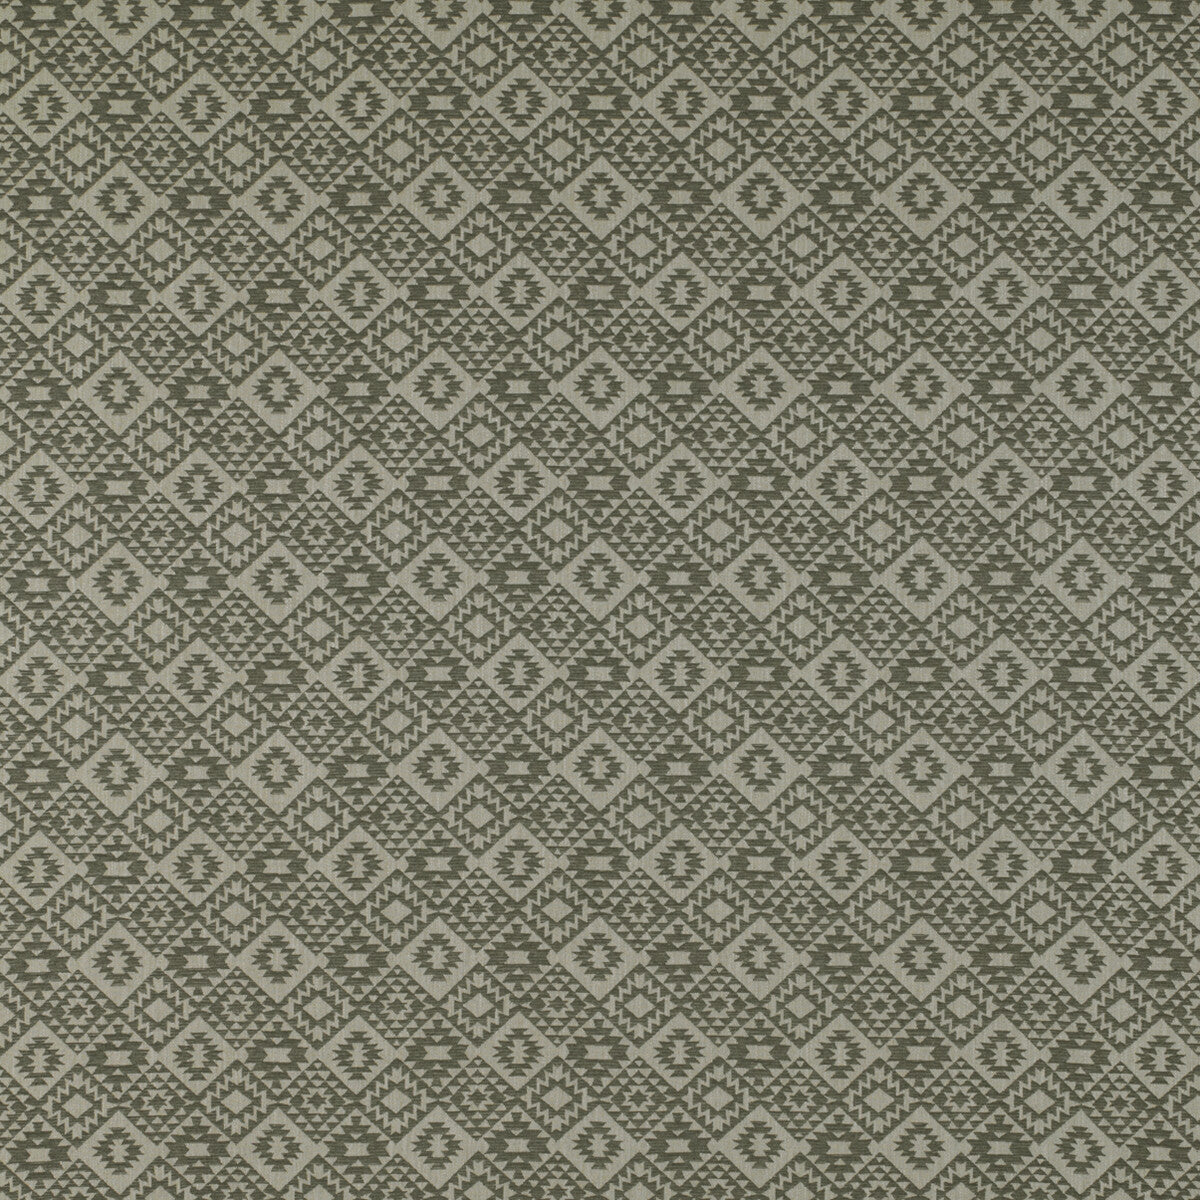 Lecco fabric in gris color - pattern GDT5323.002.0 - by Gaston y Daniela in the Tierras collection